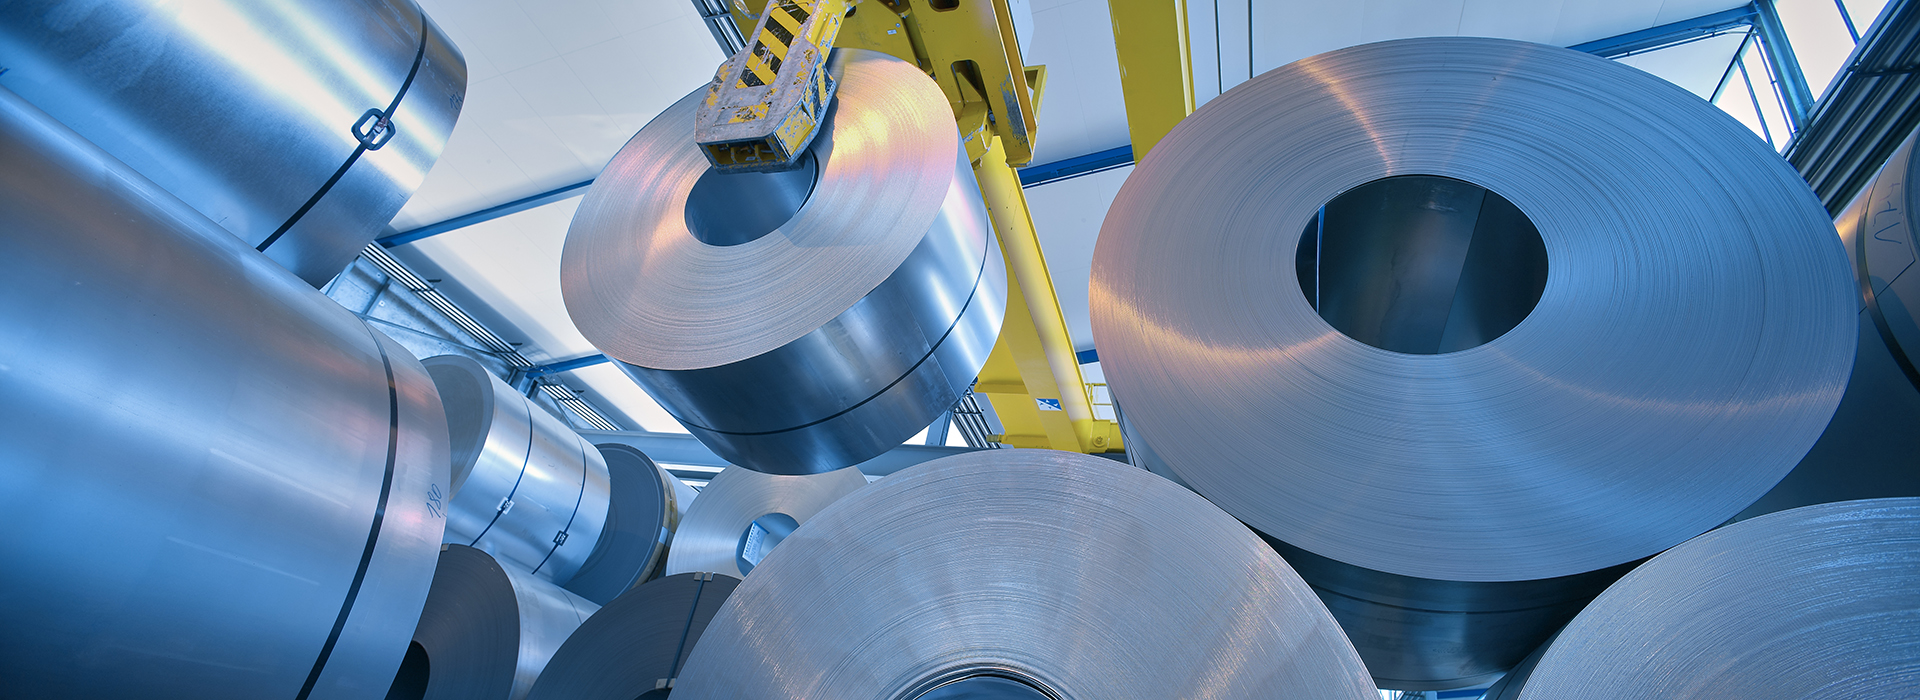 Steel prices continue to rise but pace of gains appears to slow